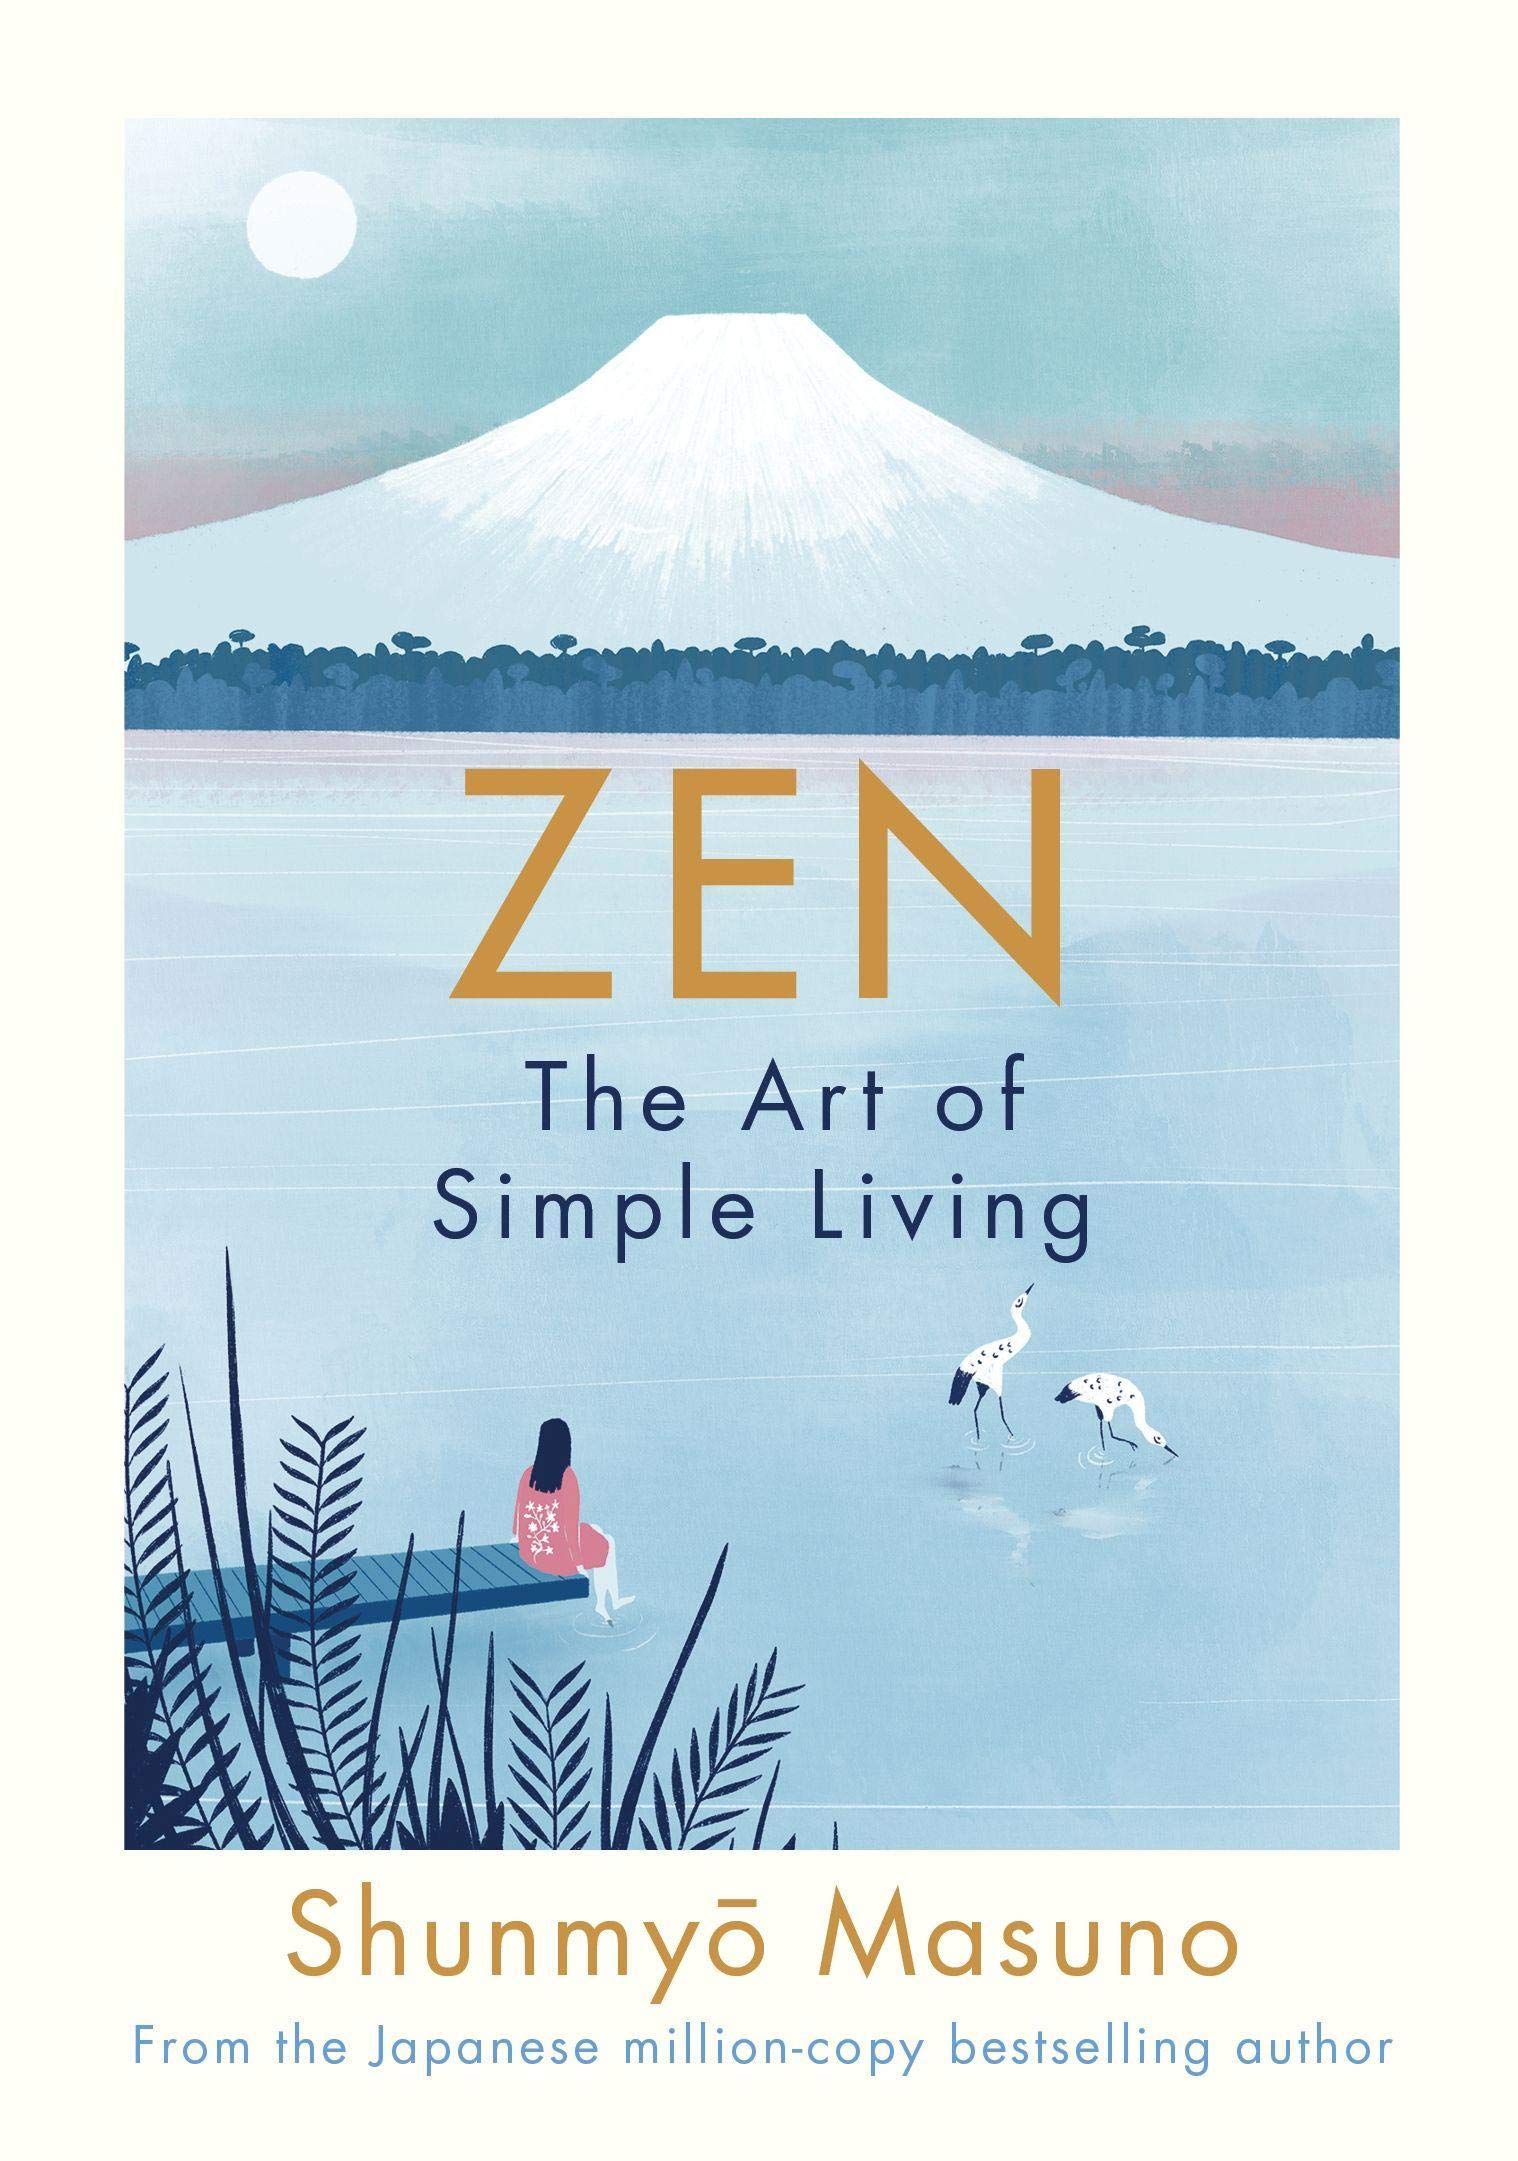 Zen and the Art of Simple Living. Graphic